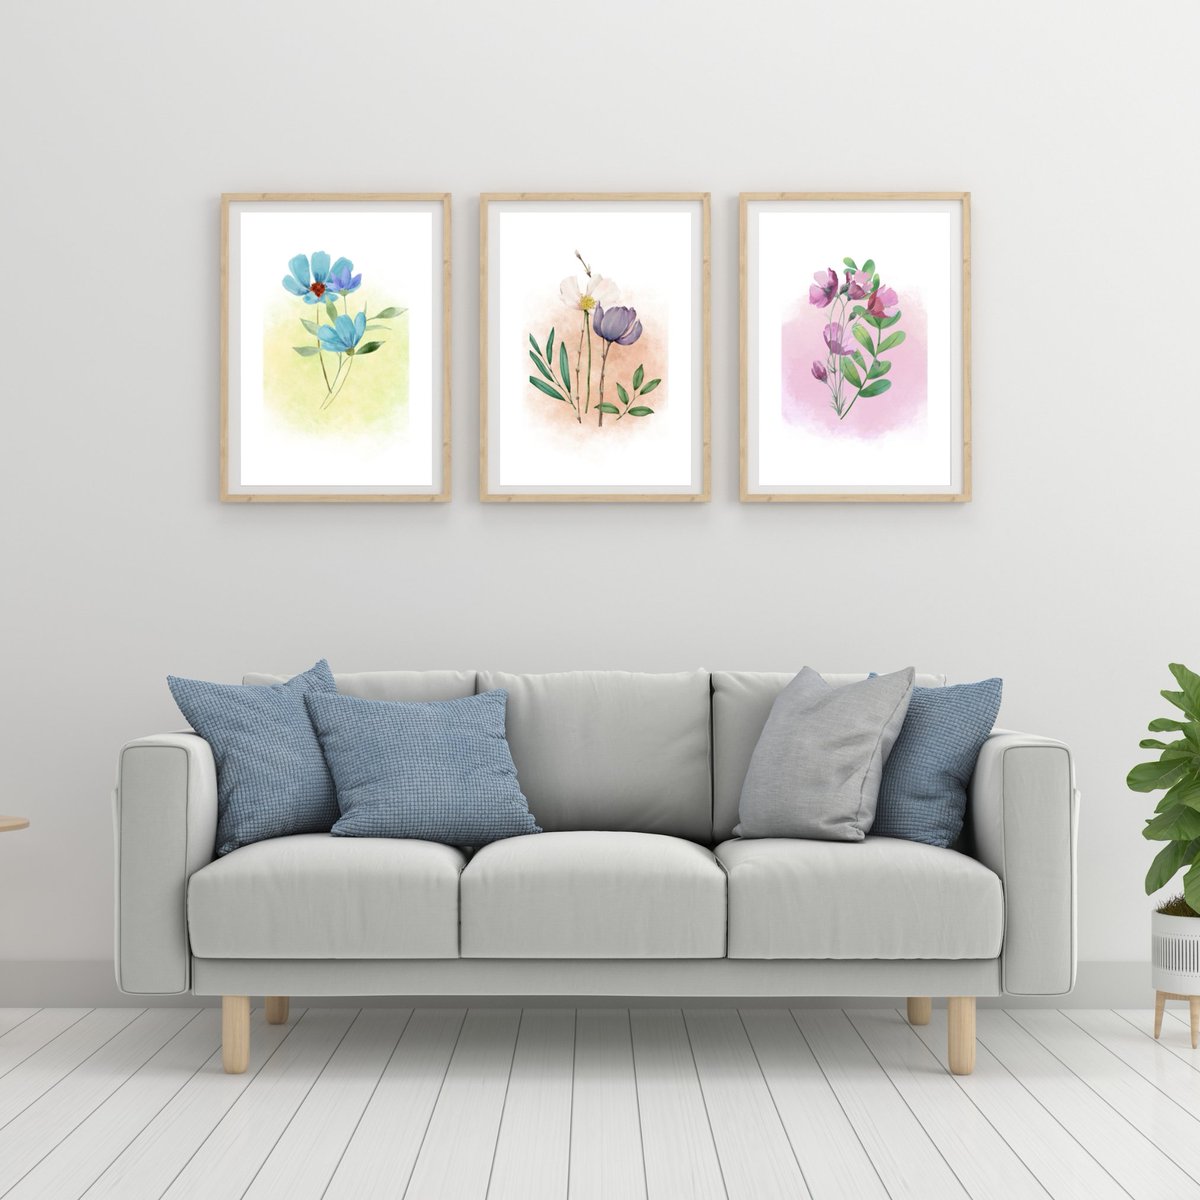 Floral Wall Art (Set of 3)
Available on my Etsy Shop whimsicalartgalore.etsy.com 

#etsystore #floralart #etsysale #artist #ArtistOnTwitter #interiorstyle #interiordecor #wallartforsale #artforsale #Artists #decor #Flowers